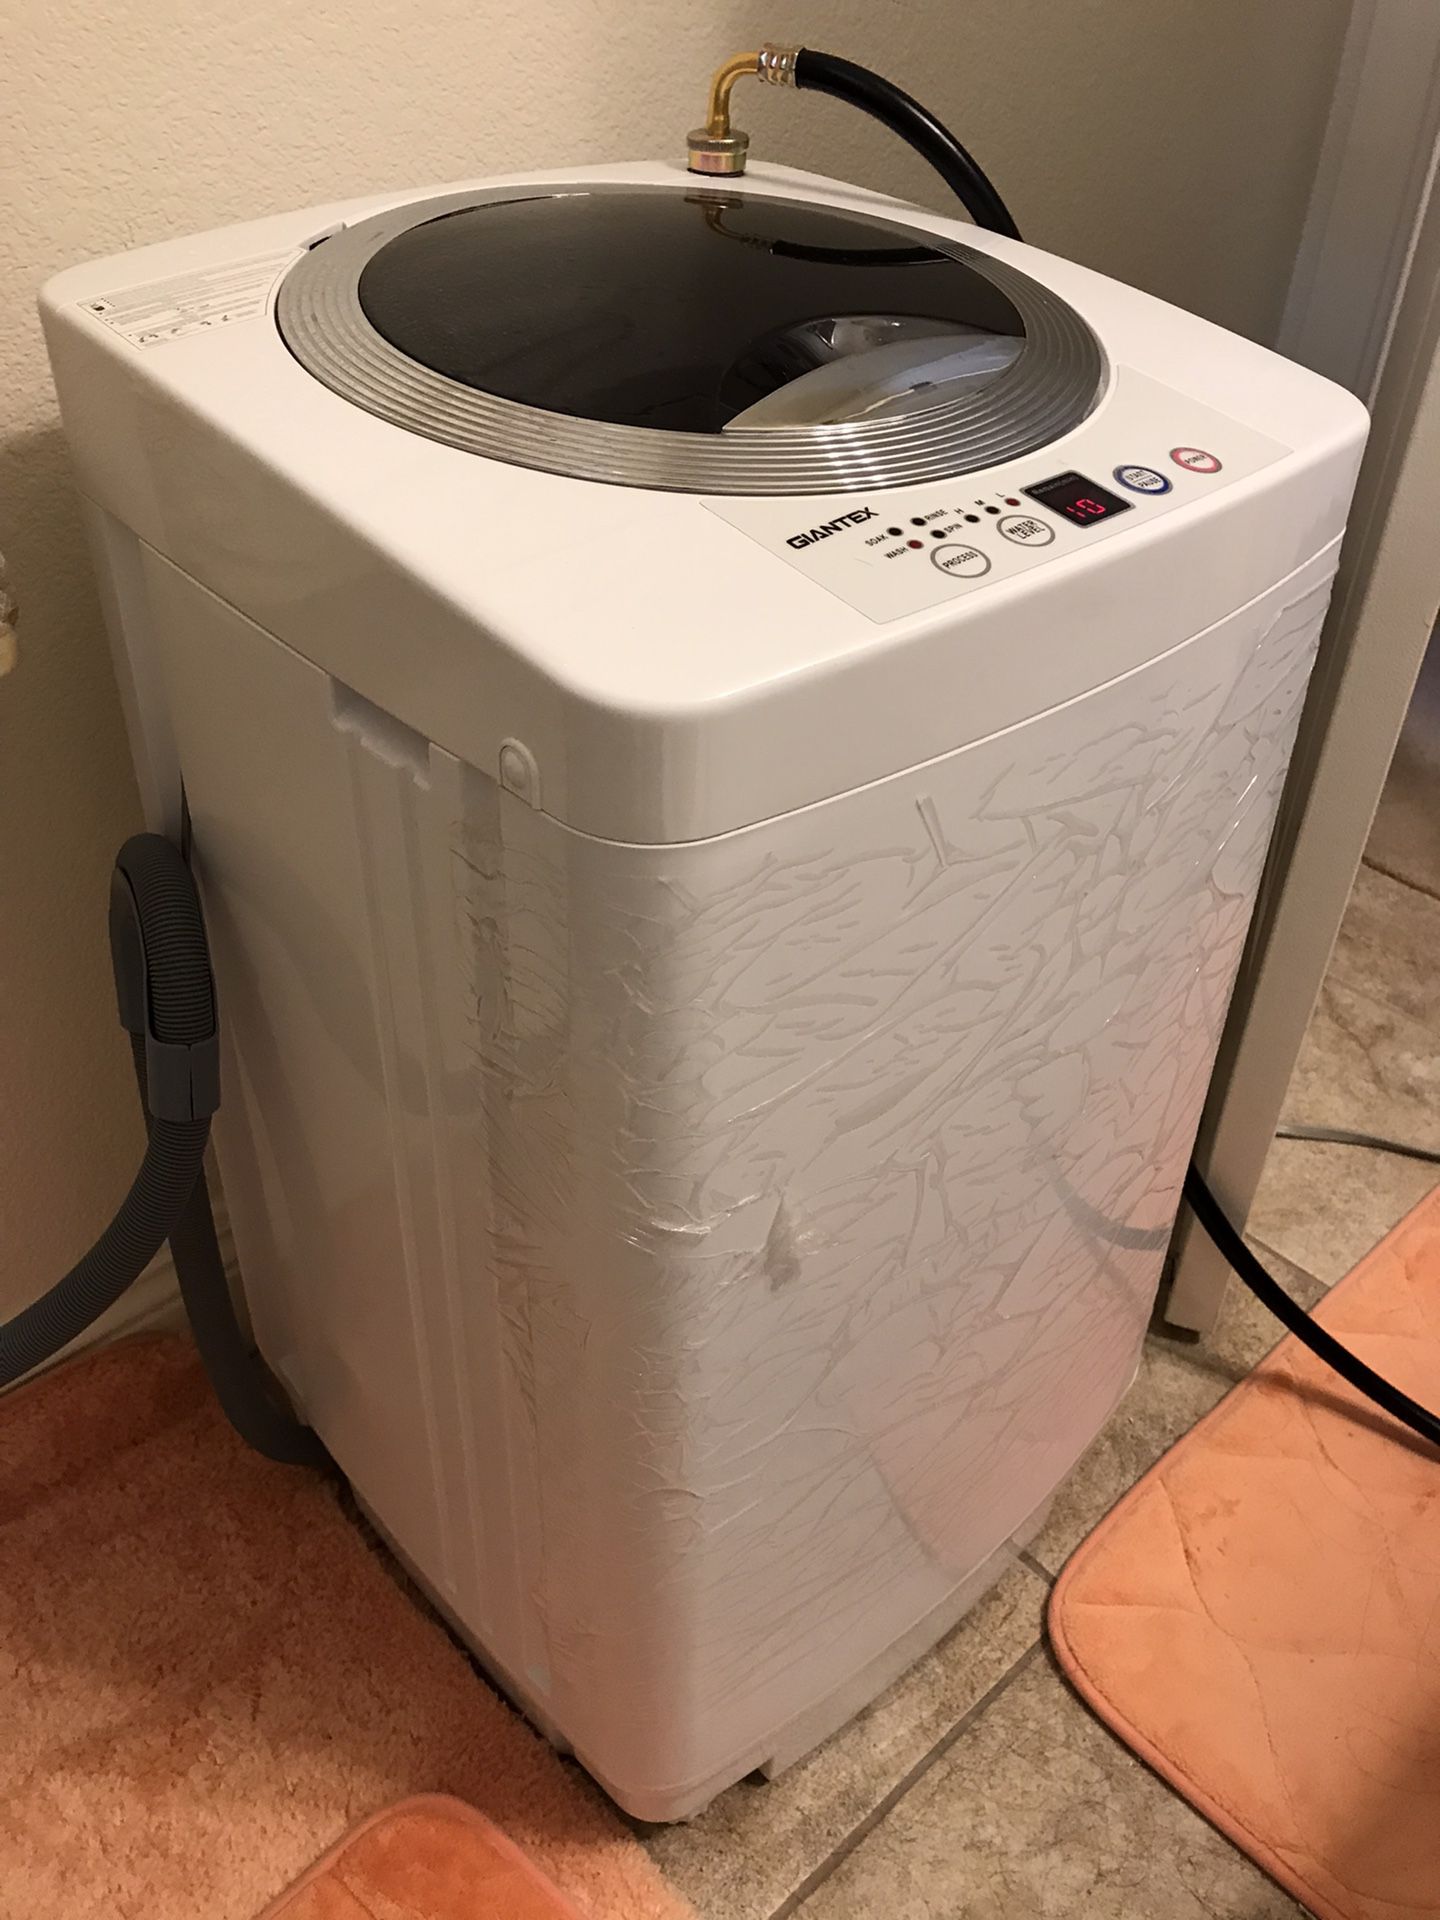 Washer fully auto electric operate - Good for small apartment or RV